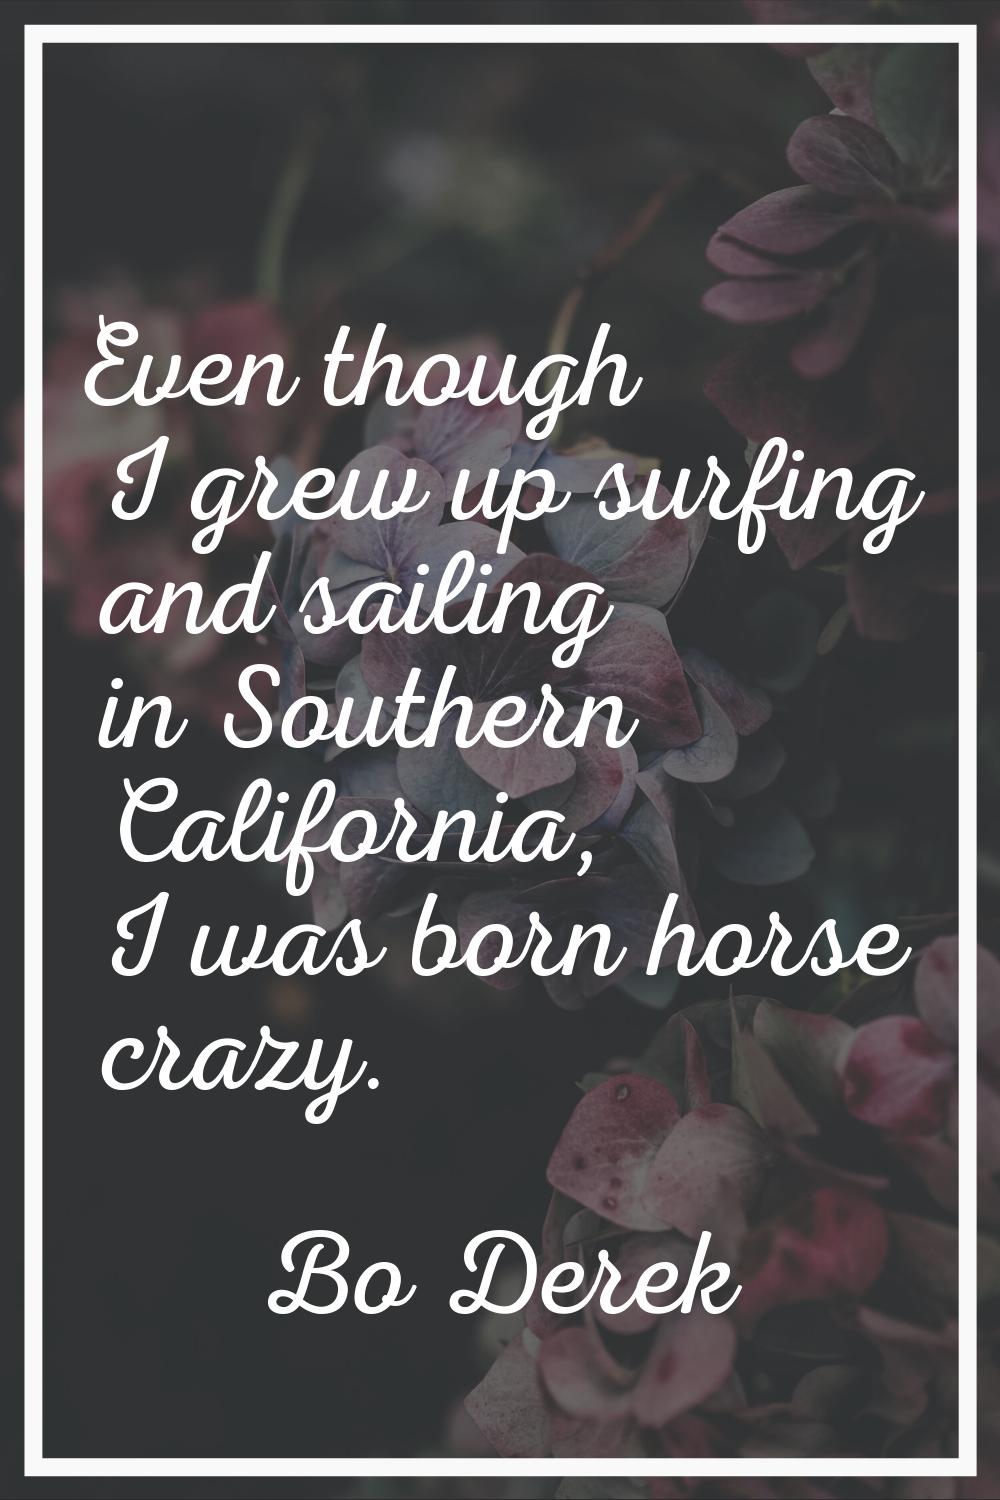 Even though I grew up surfing and sailing in Southern California, I was born horse crazy.